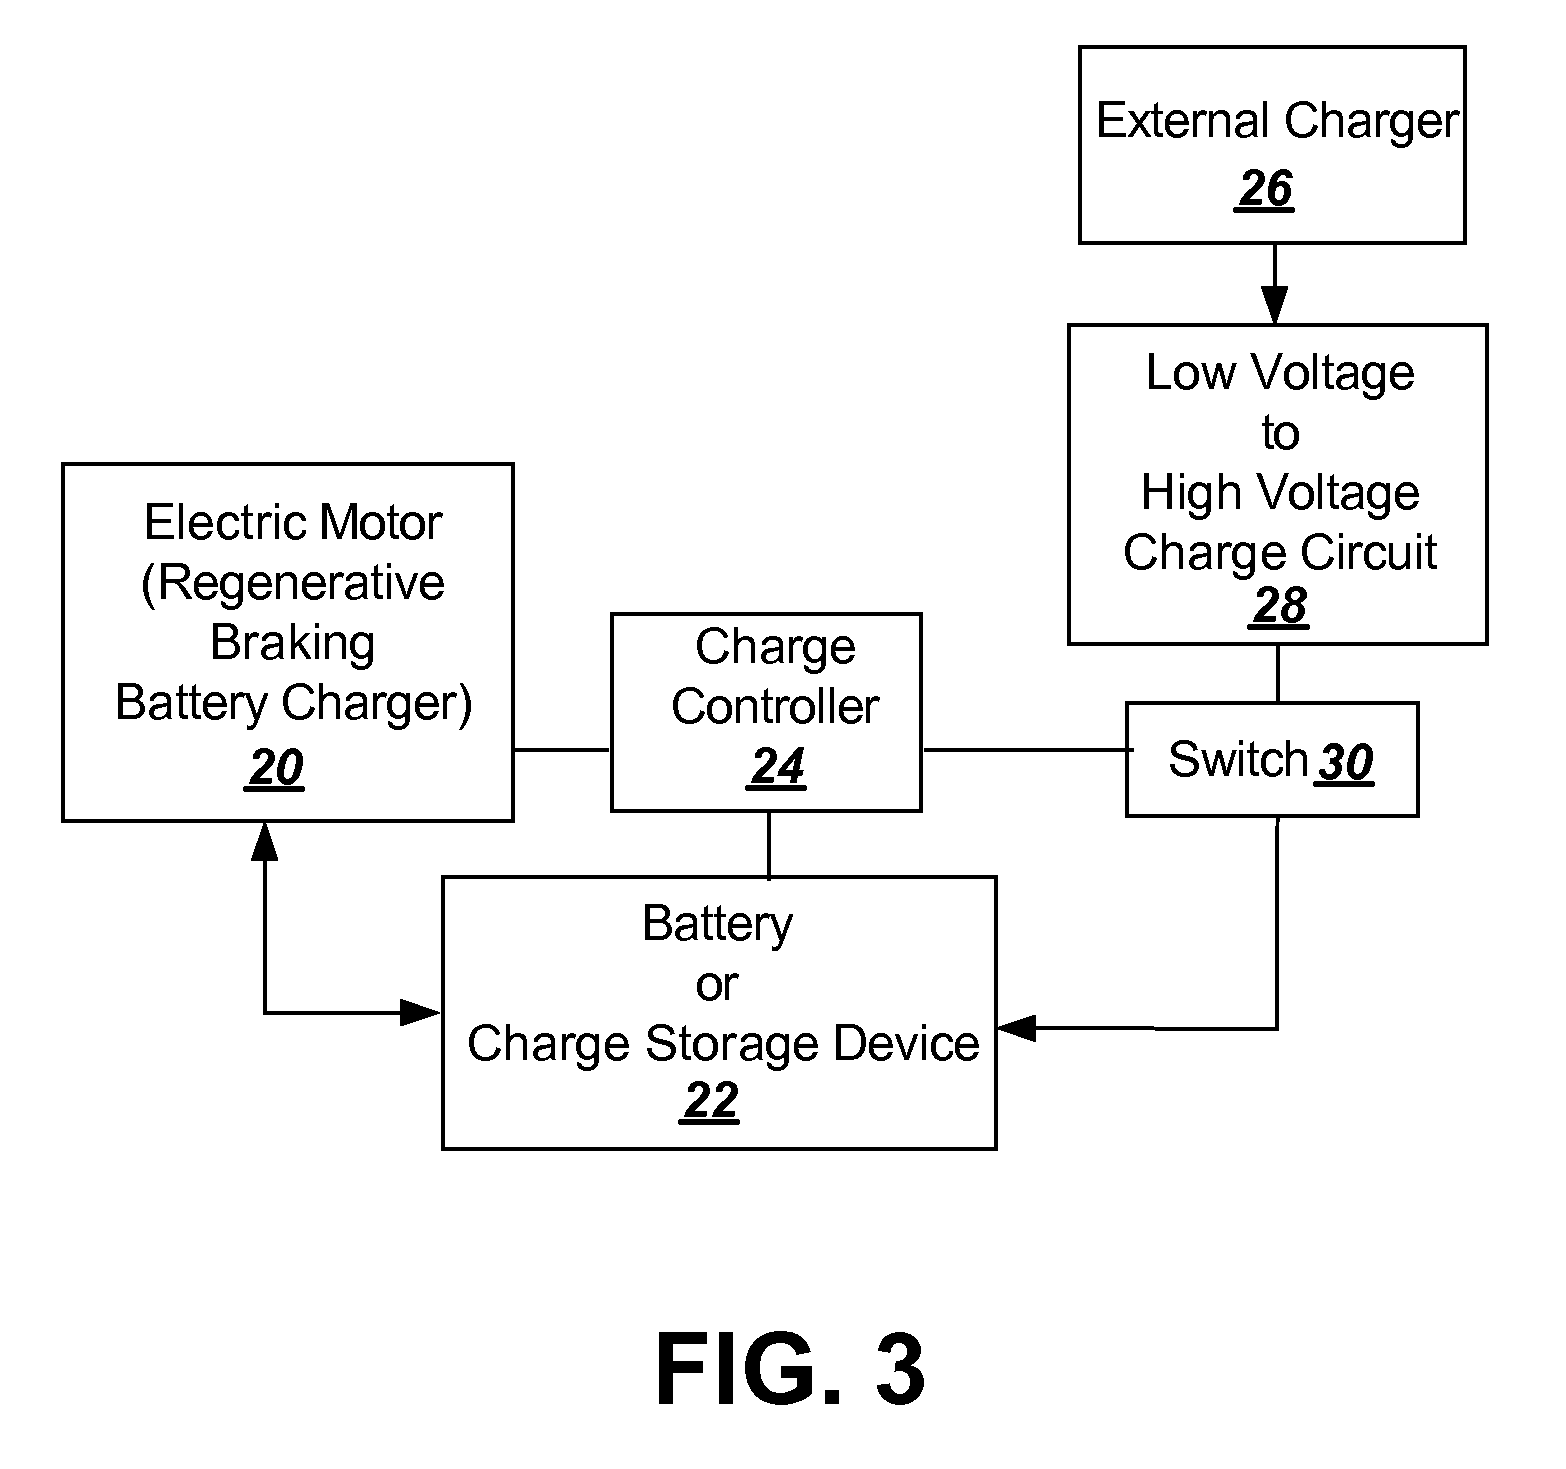 Current limiting parallel battery charging system to enable plug-in or solar power to supplement regenerative braking in hybrid or electric vehicle